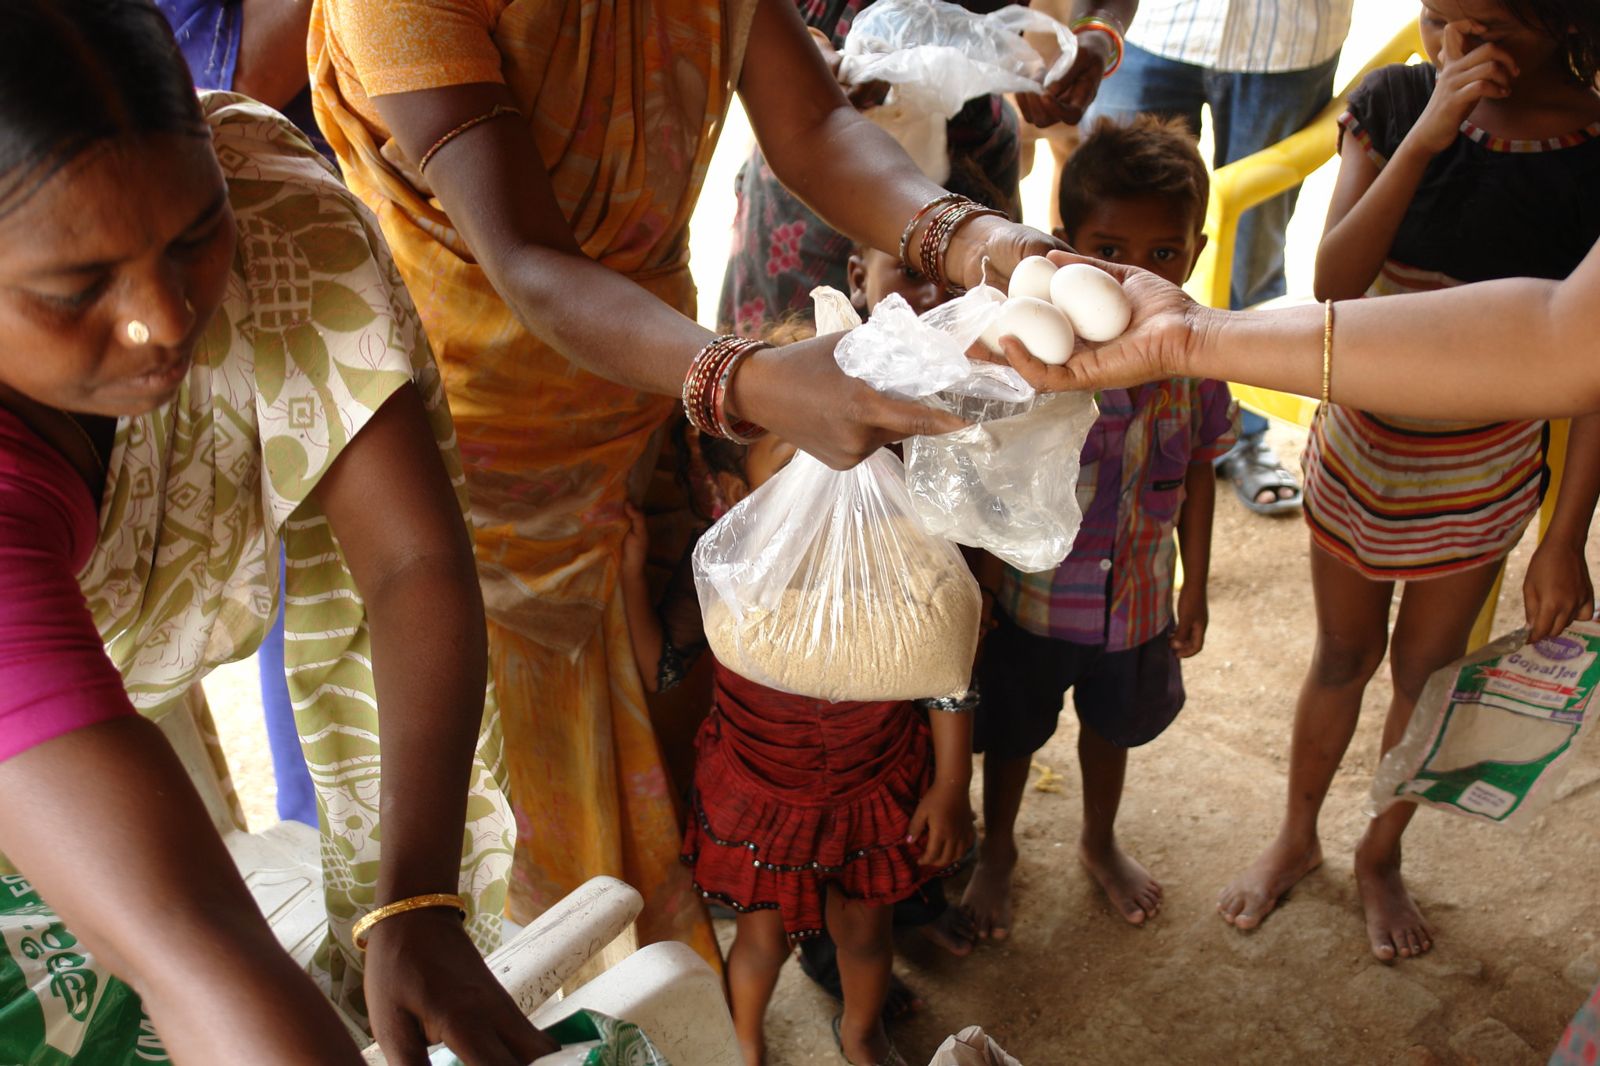 Despite supposed food assistance in India, people are starving to death